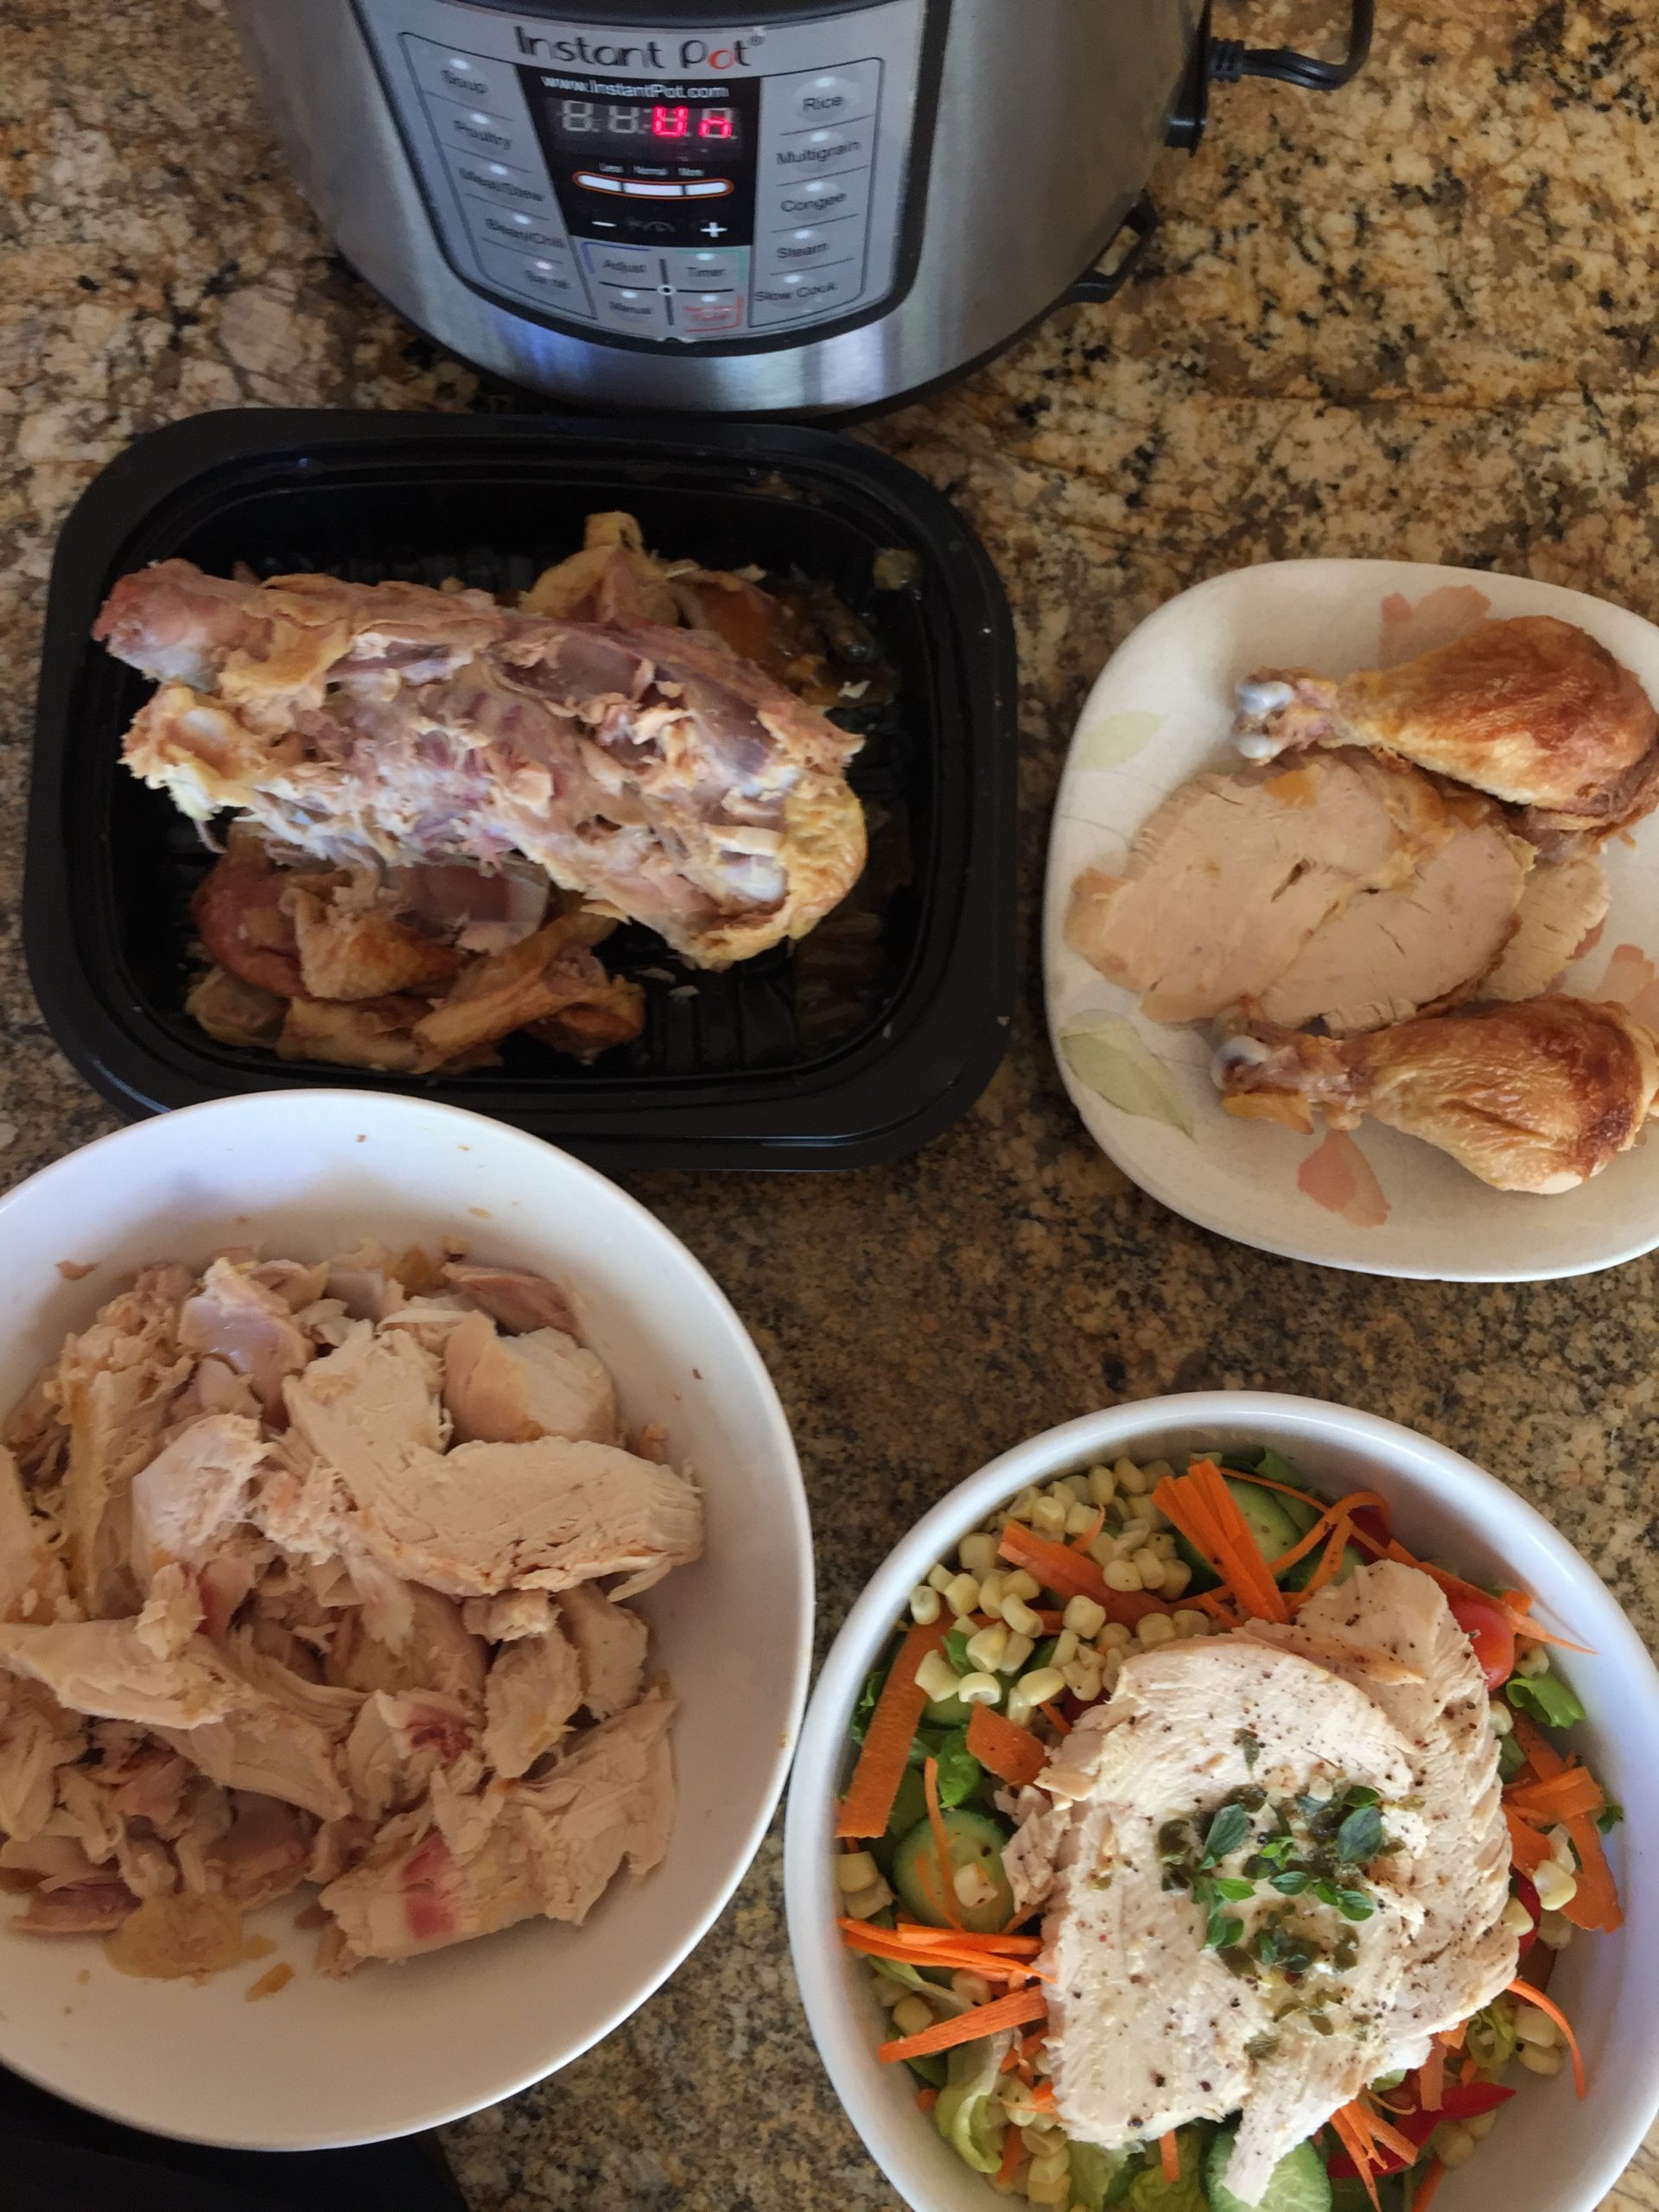 Rotisserie chicken with bones, shreds, slices, salad and instapot